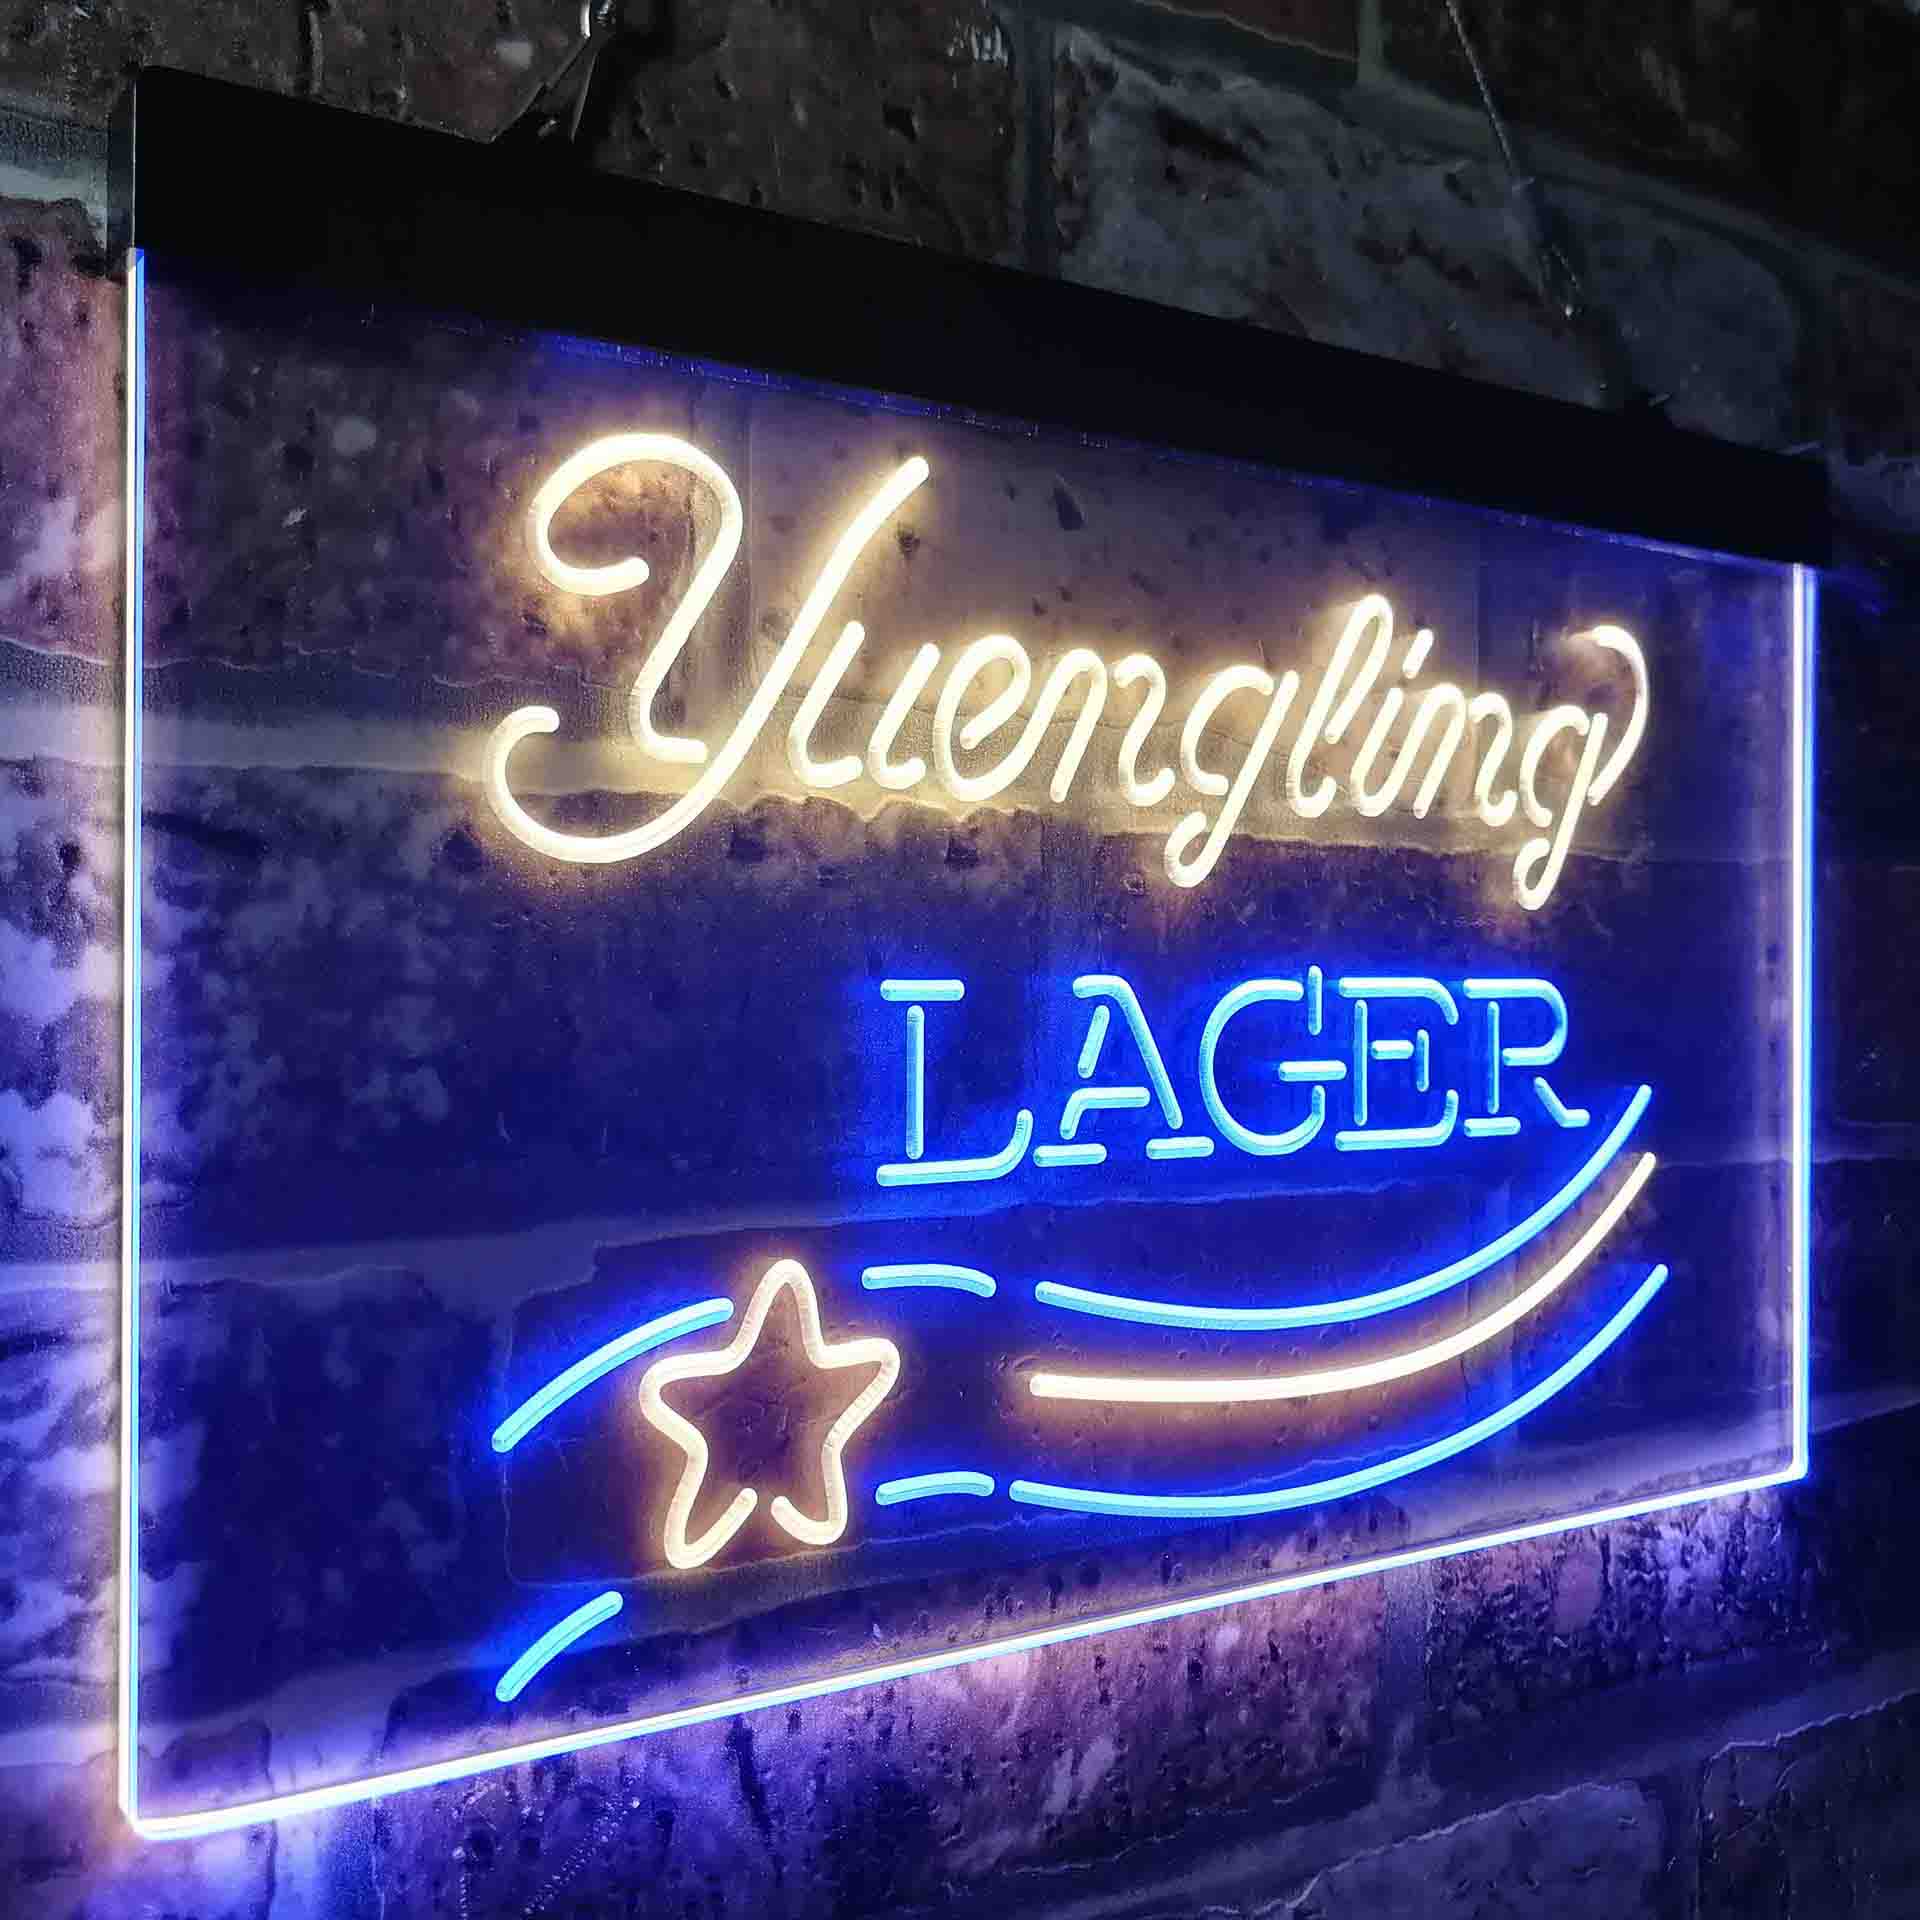 Yuengling Beer Larger Bar LED Neon Sign